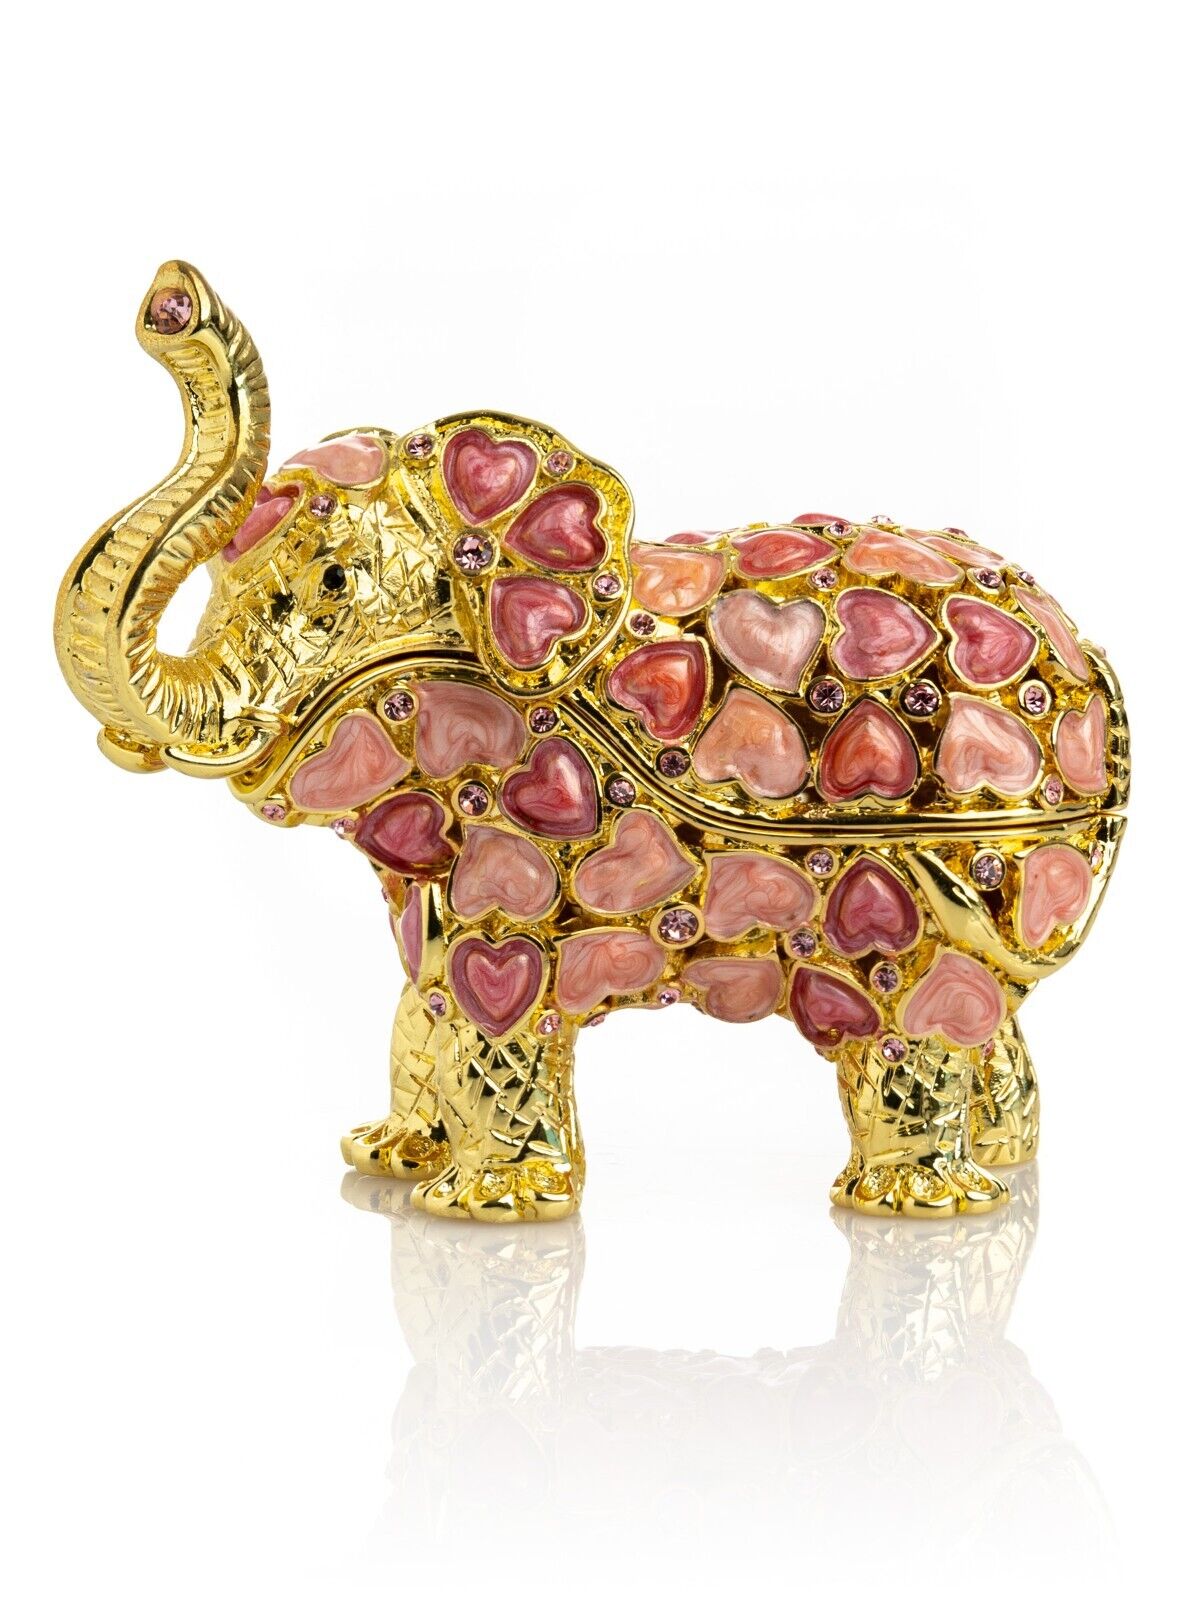 Keren Kopal Elephant with Hearts Trinket Box Decorated with Austrian Crystals